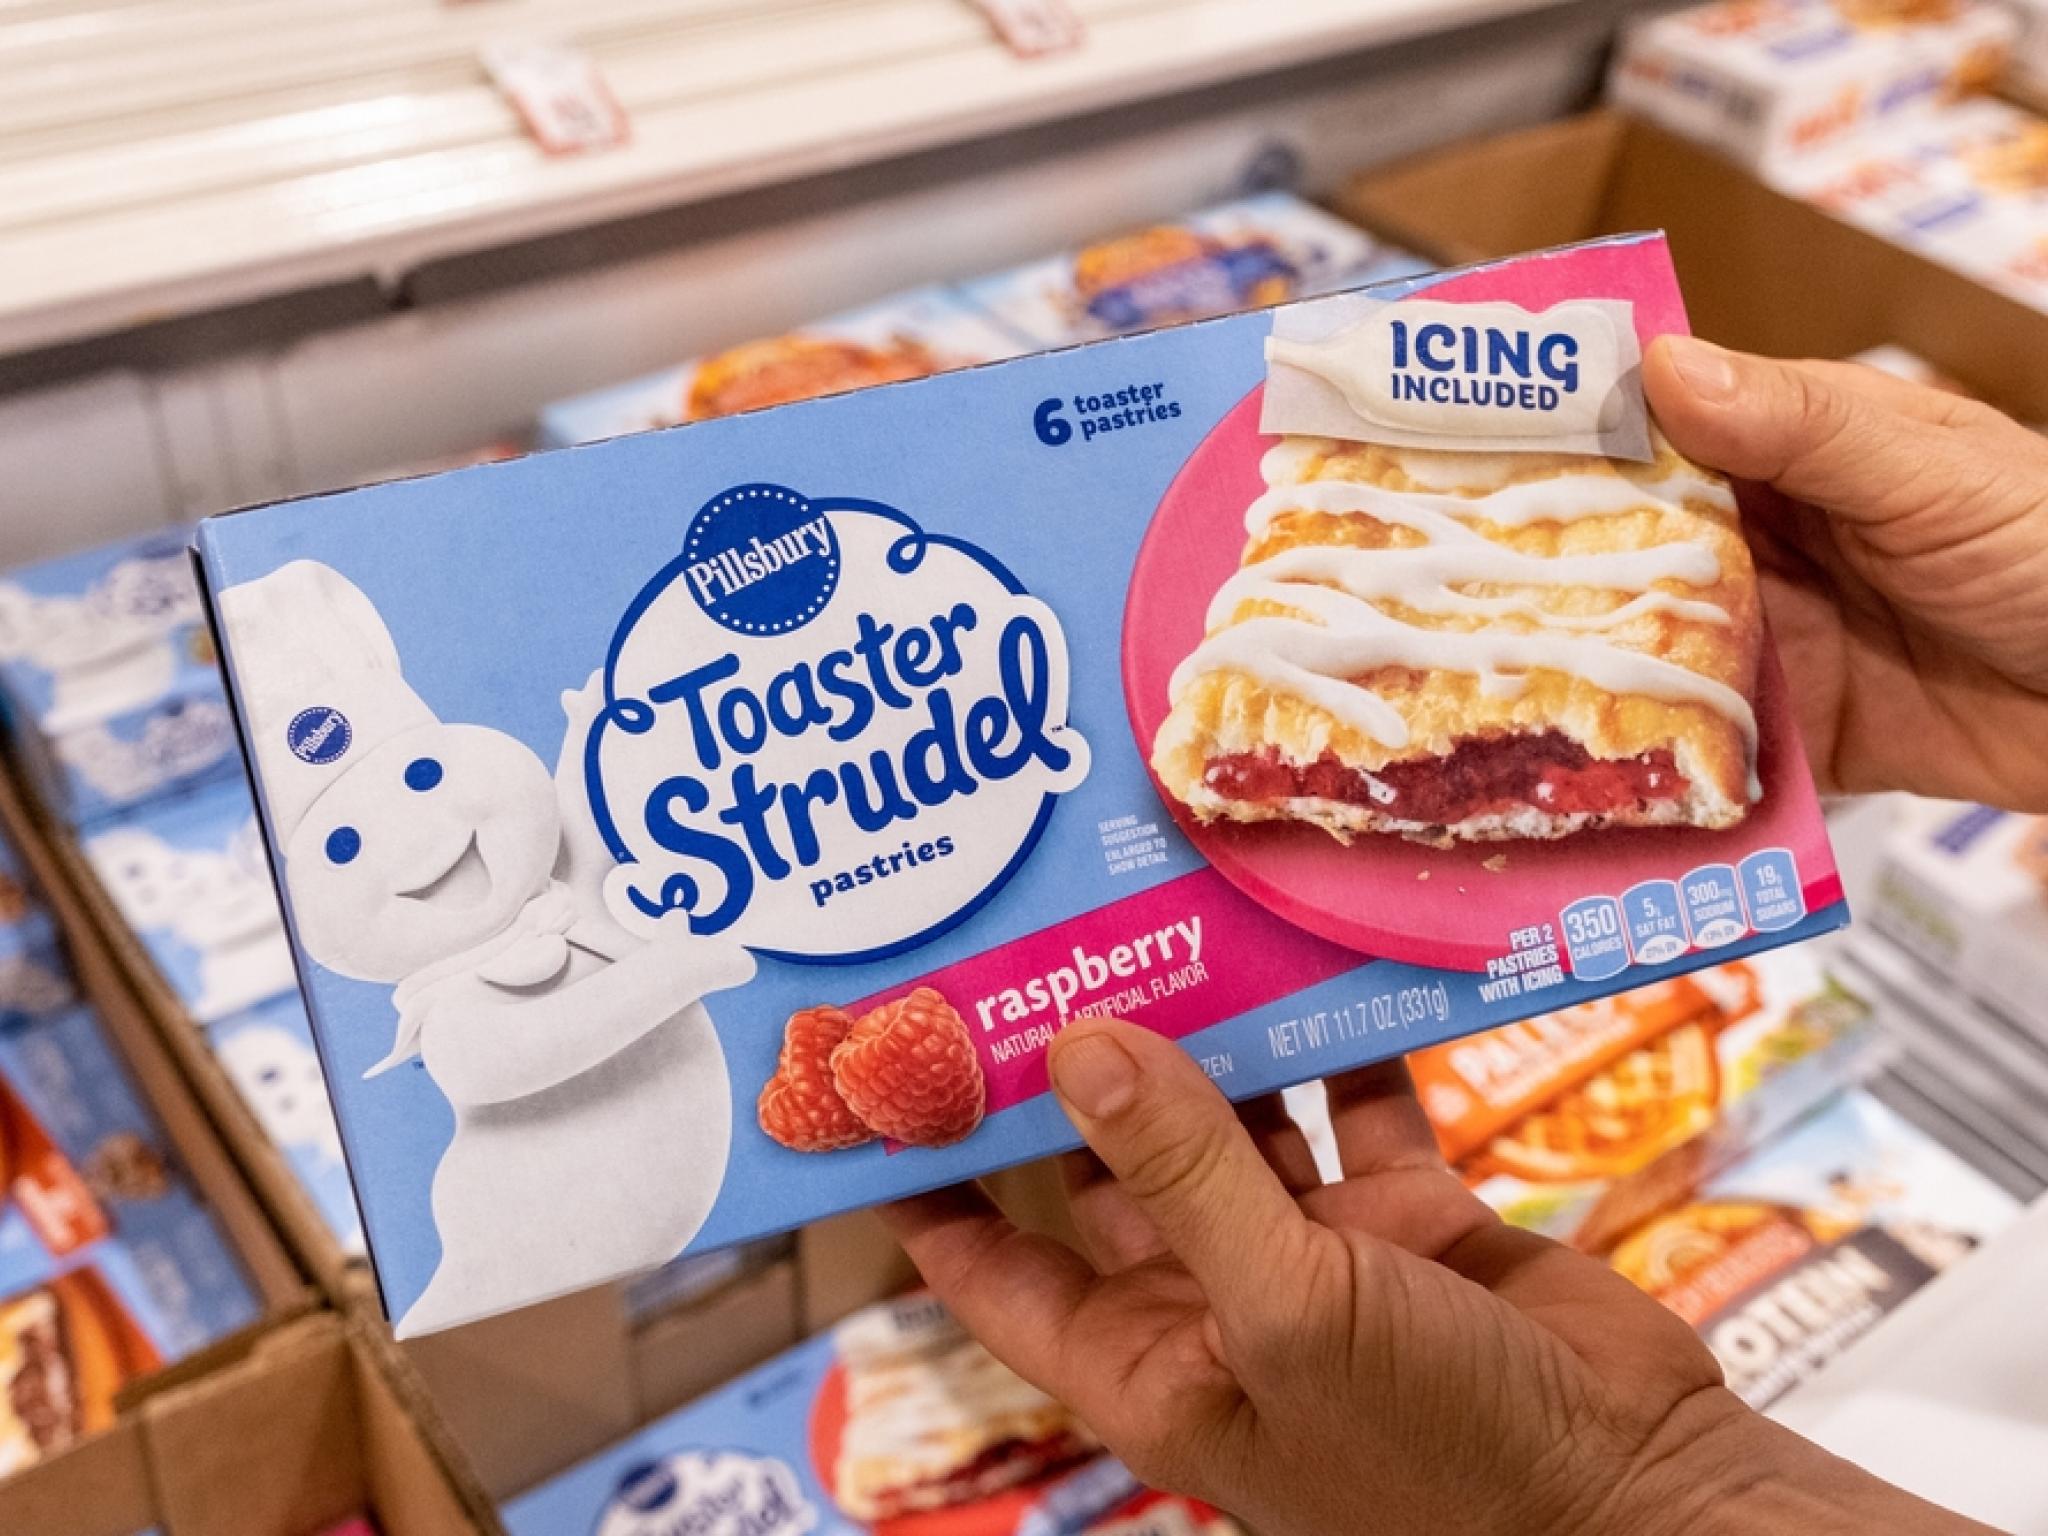  pillsbury-maker-general-mills-annual-profit-outlook-disappoints-stock-falls 